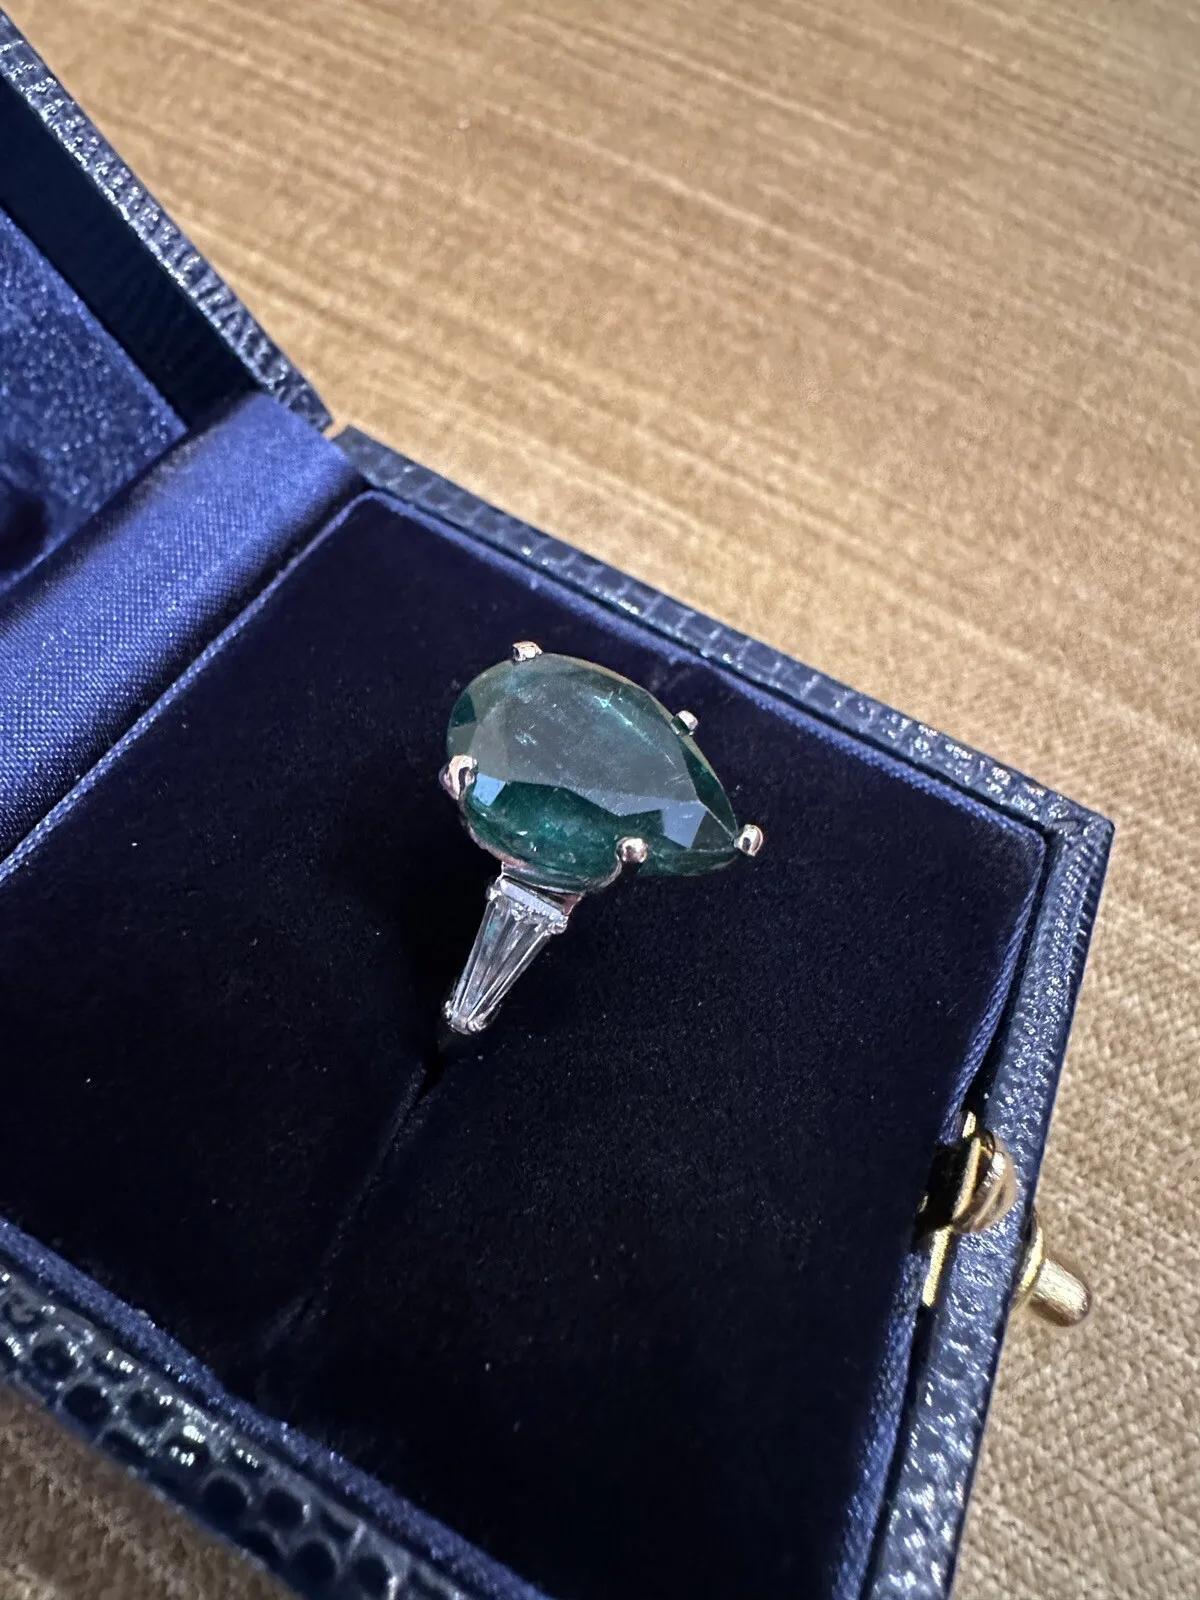 GIA Certified Pear Emerald 5.96 Carat and Diamond Ring in Platinum 

Vintage Emerald and Diamond Ring features a 5.96 carat Natural Pear Shaped Emerald accented by 2 Tapered Baguette Diamonds set in Platinum.

Emerald weight is 5.96 carats and is